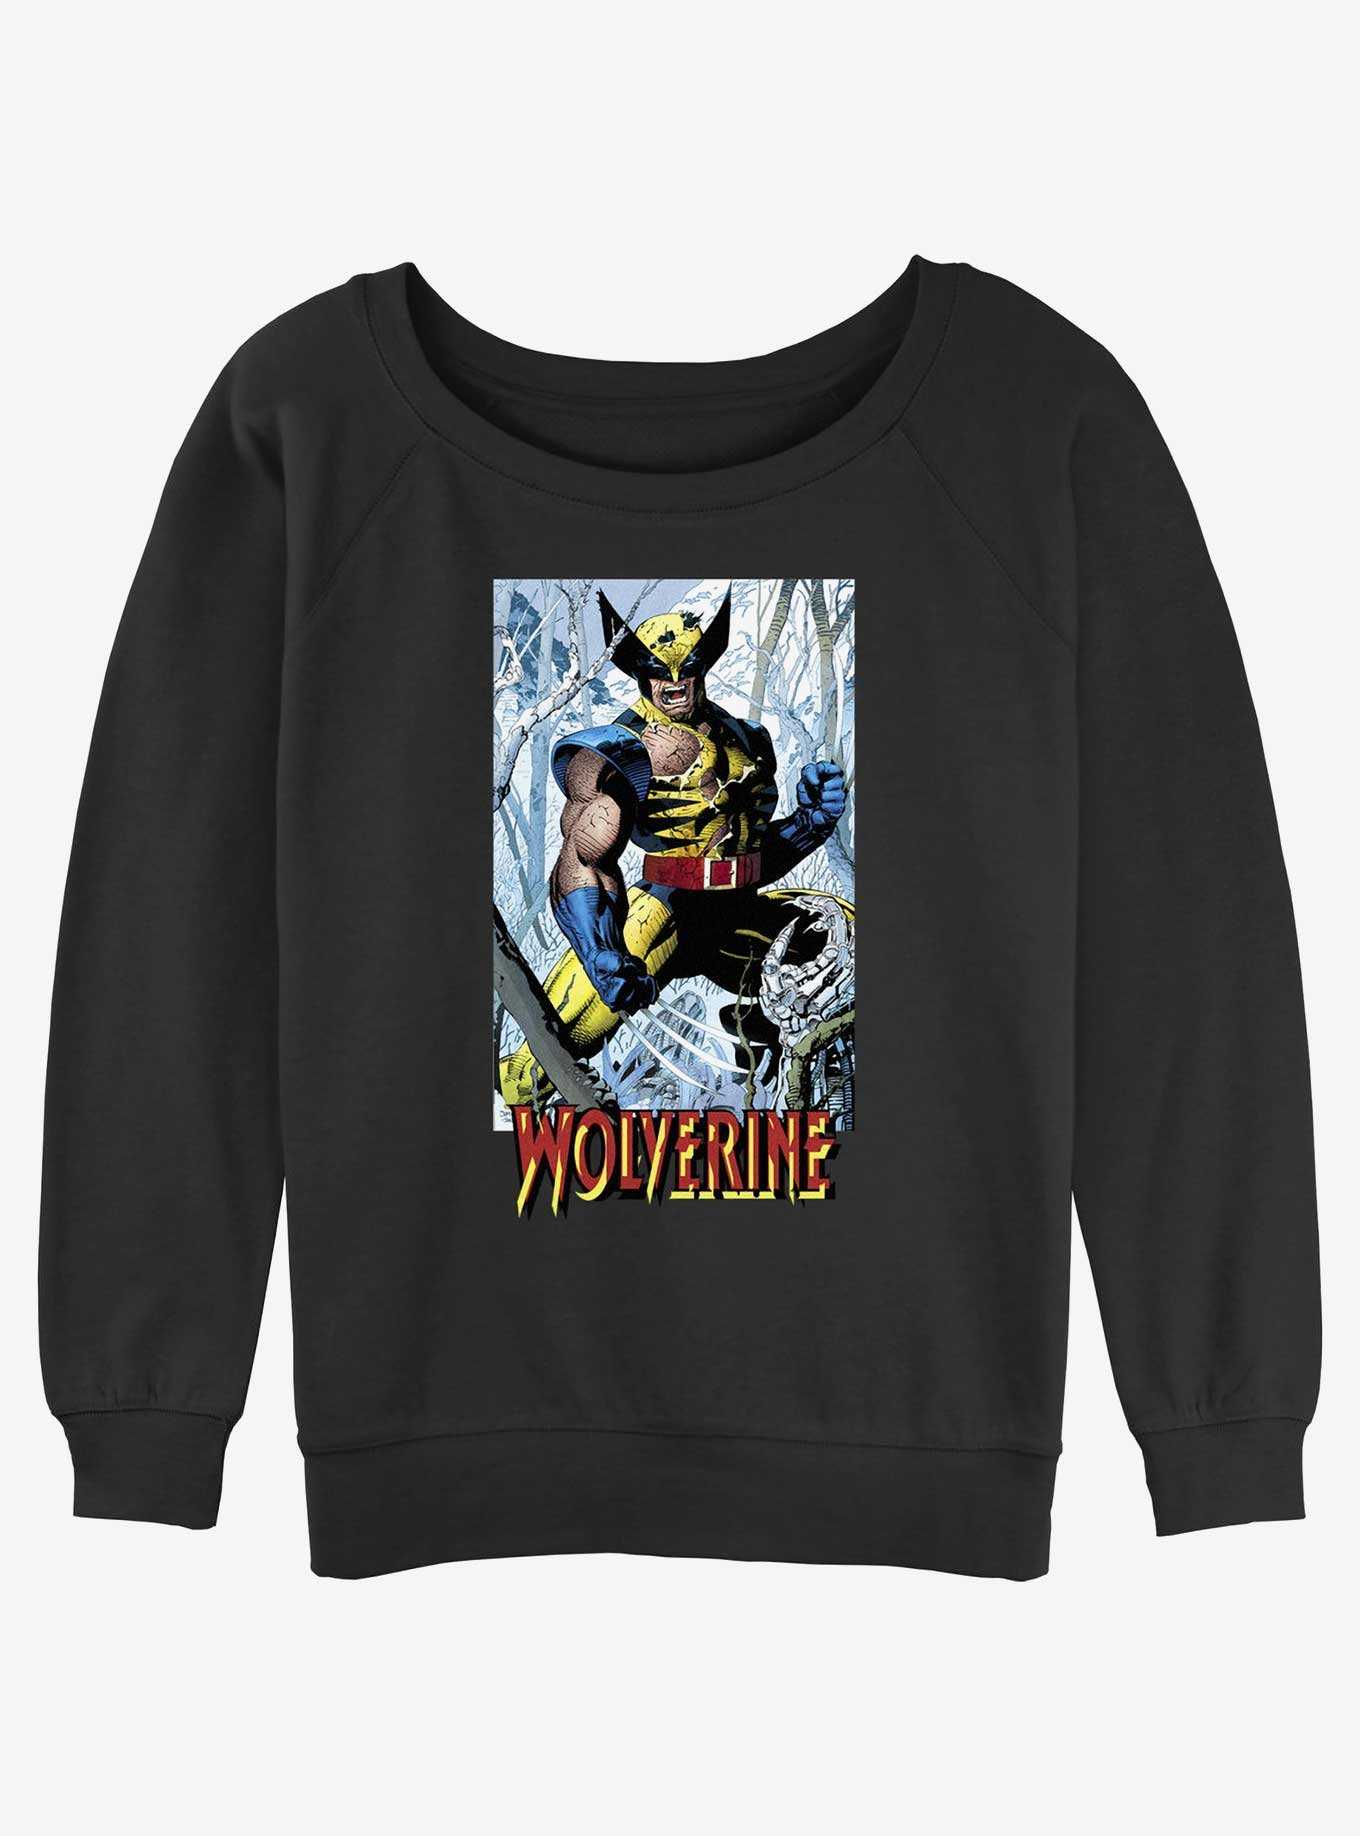 Wolverine Discipline 22 From Then Til Now Trading Card Girls Slouchy Sweatshirt, , hi-res